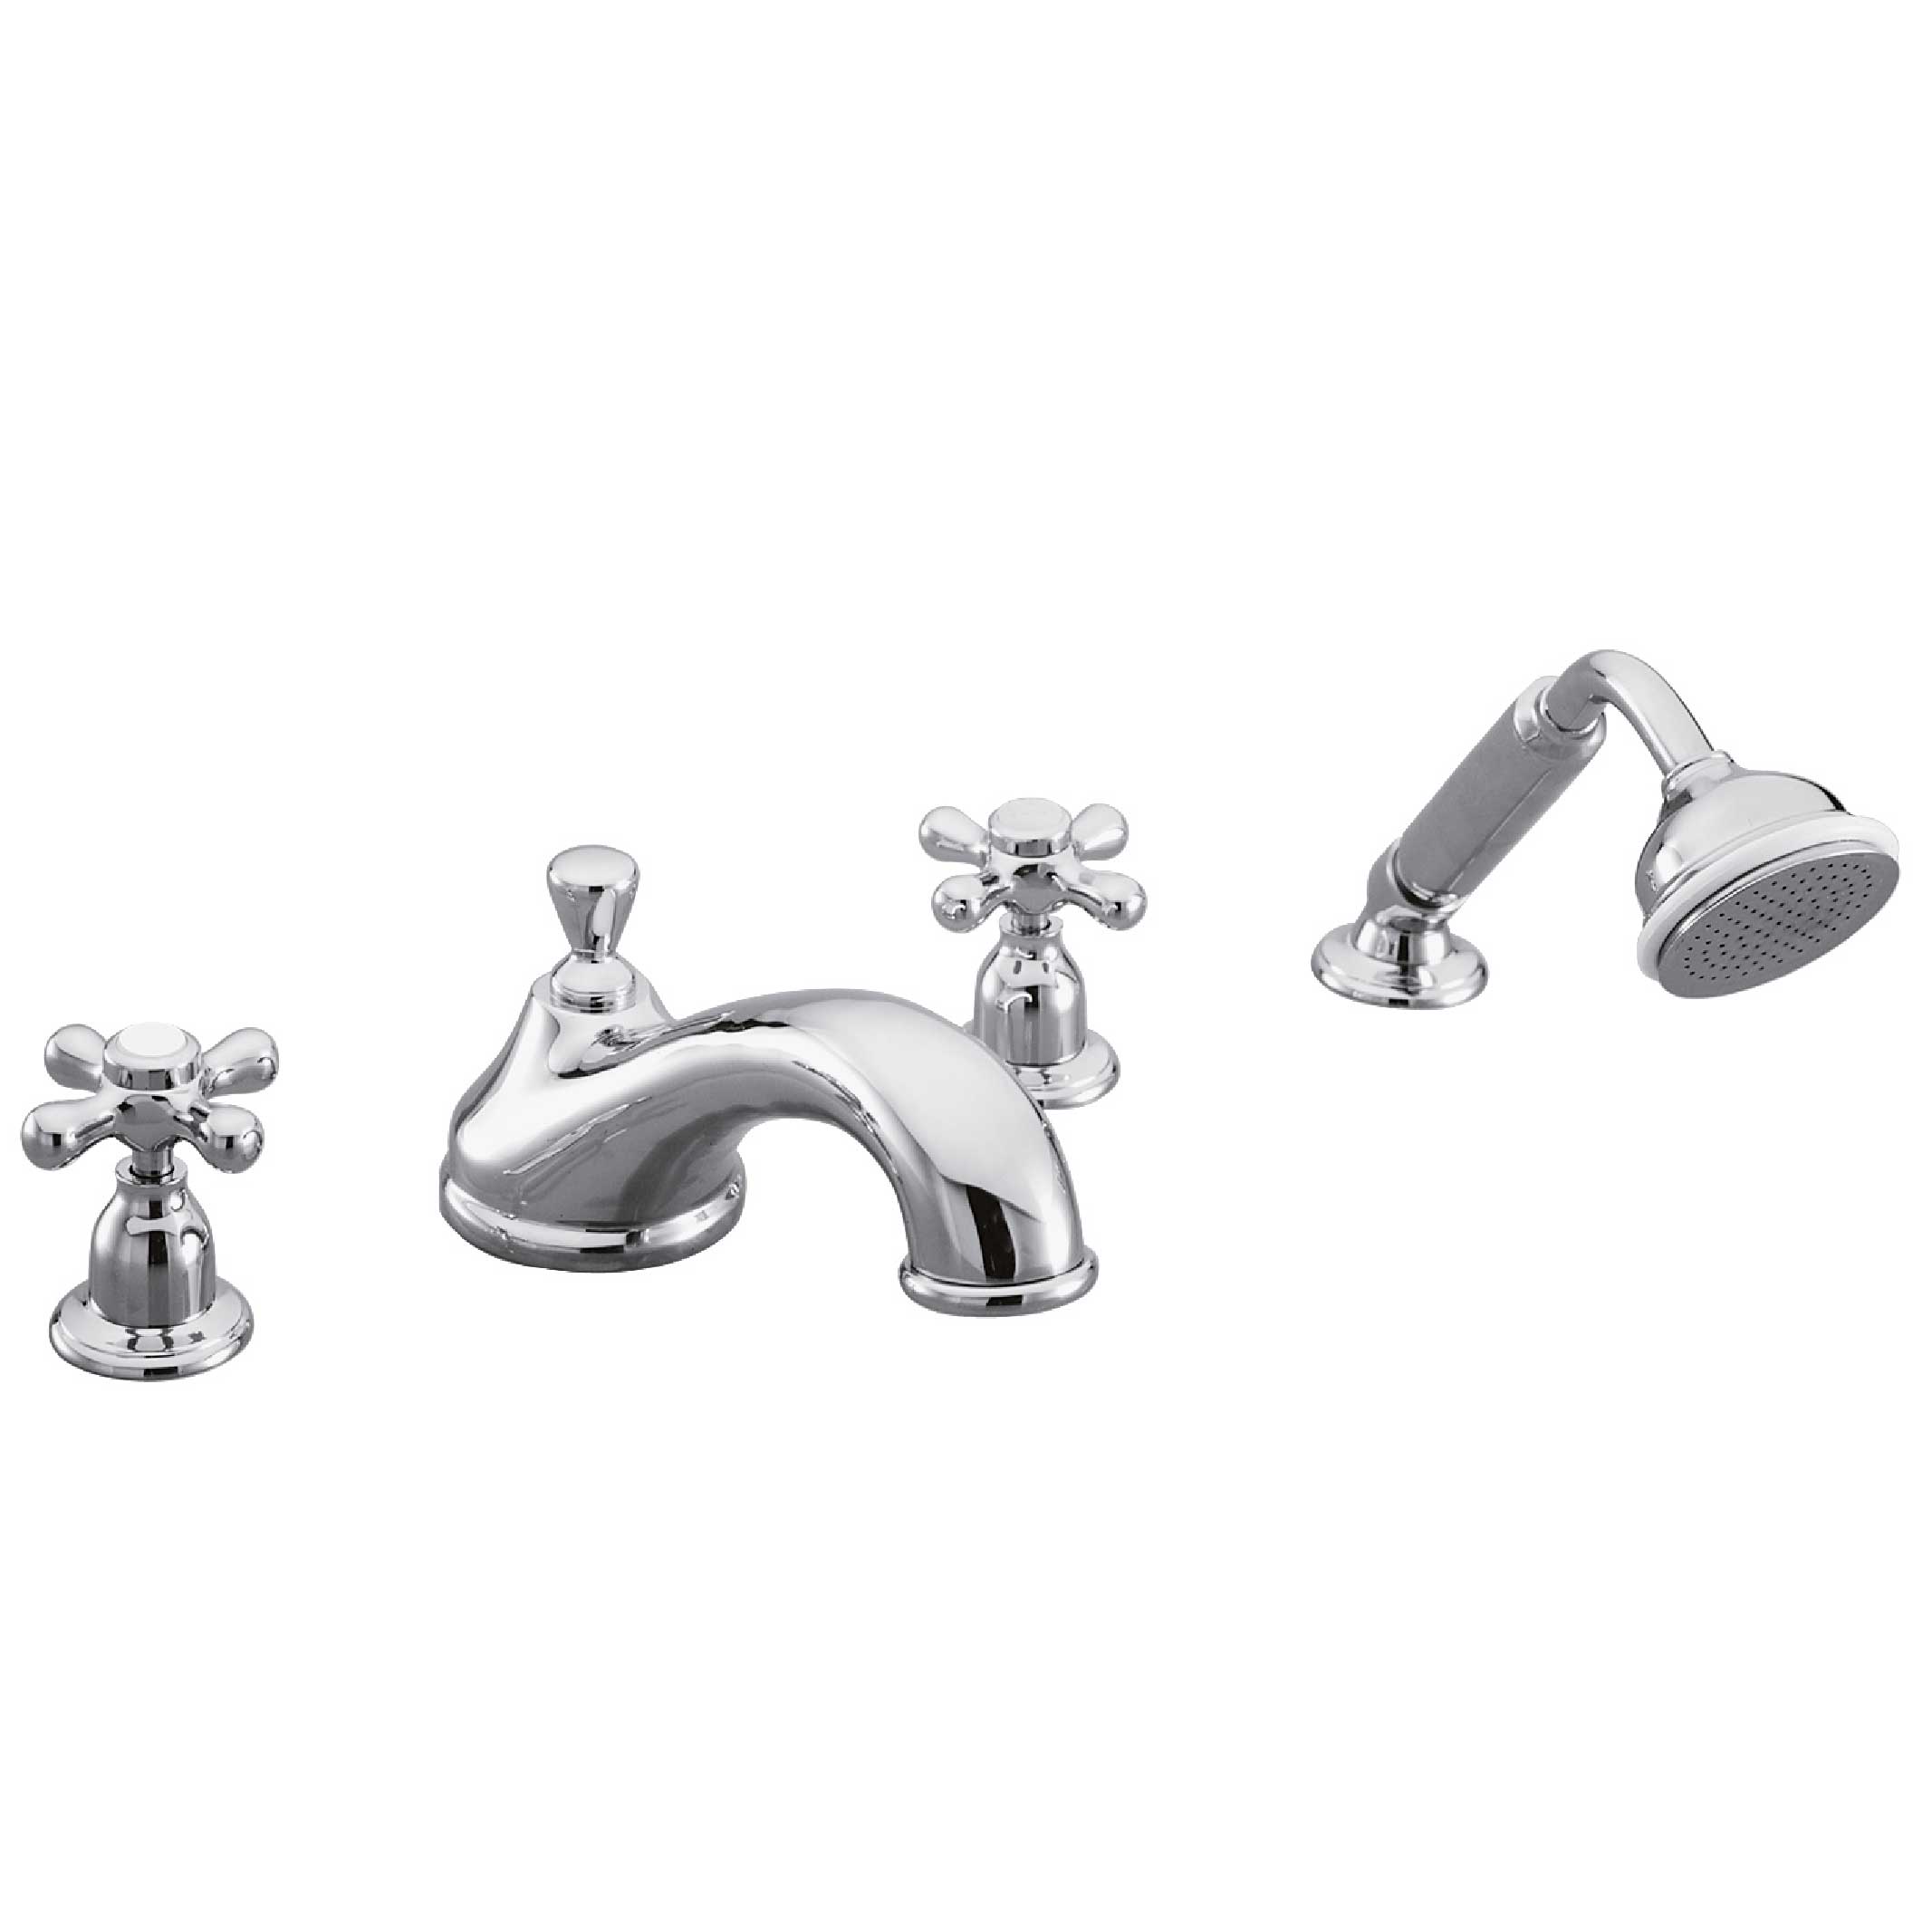 M40-3304 4-hole bath and shower mixer